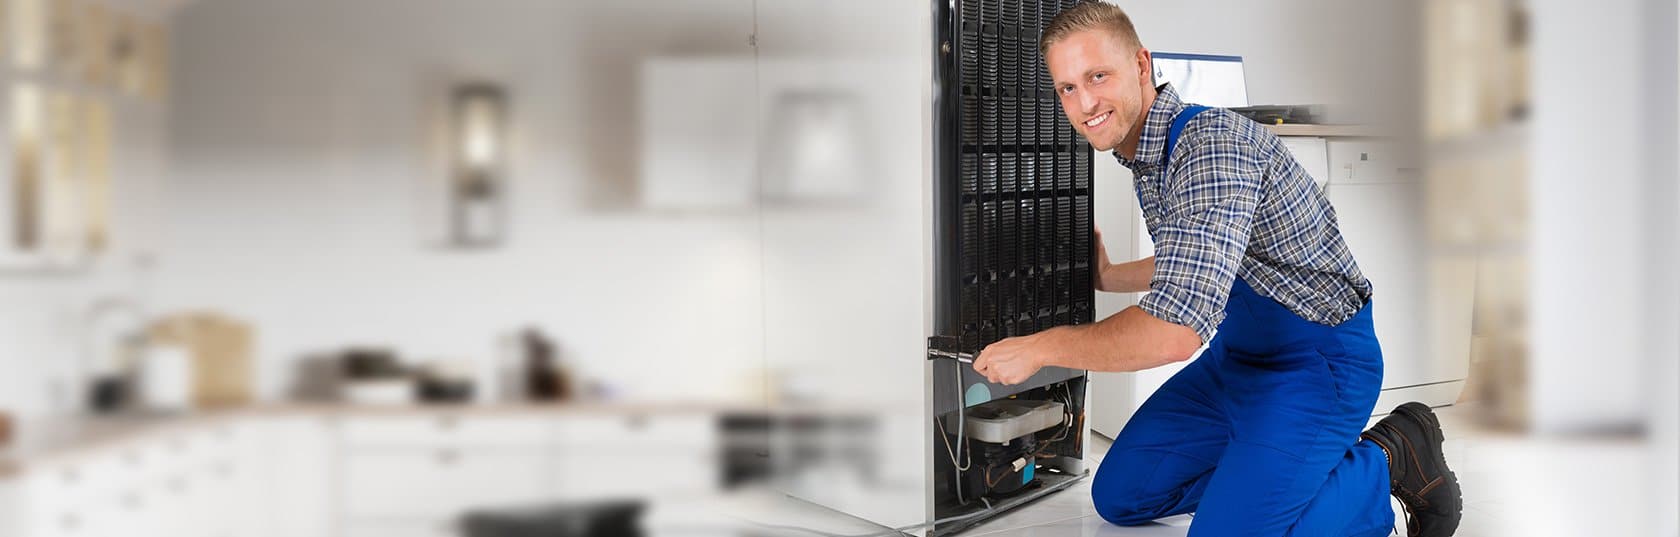 A man is smiling while holding the back of an old computer.